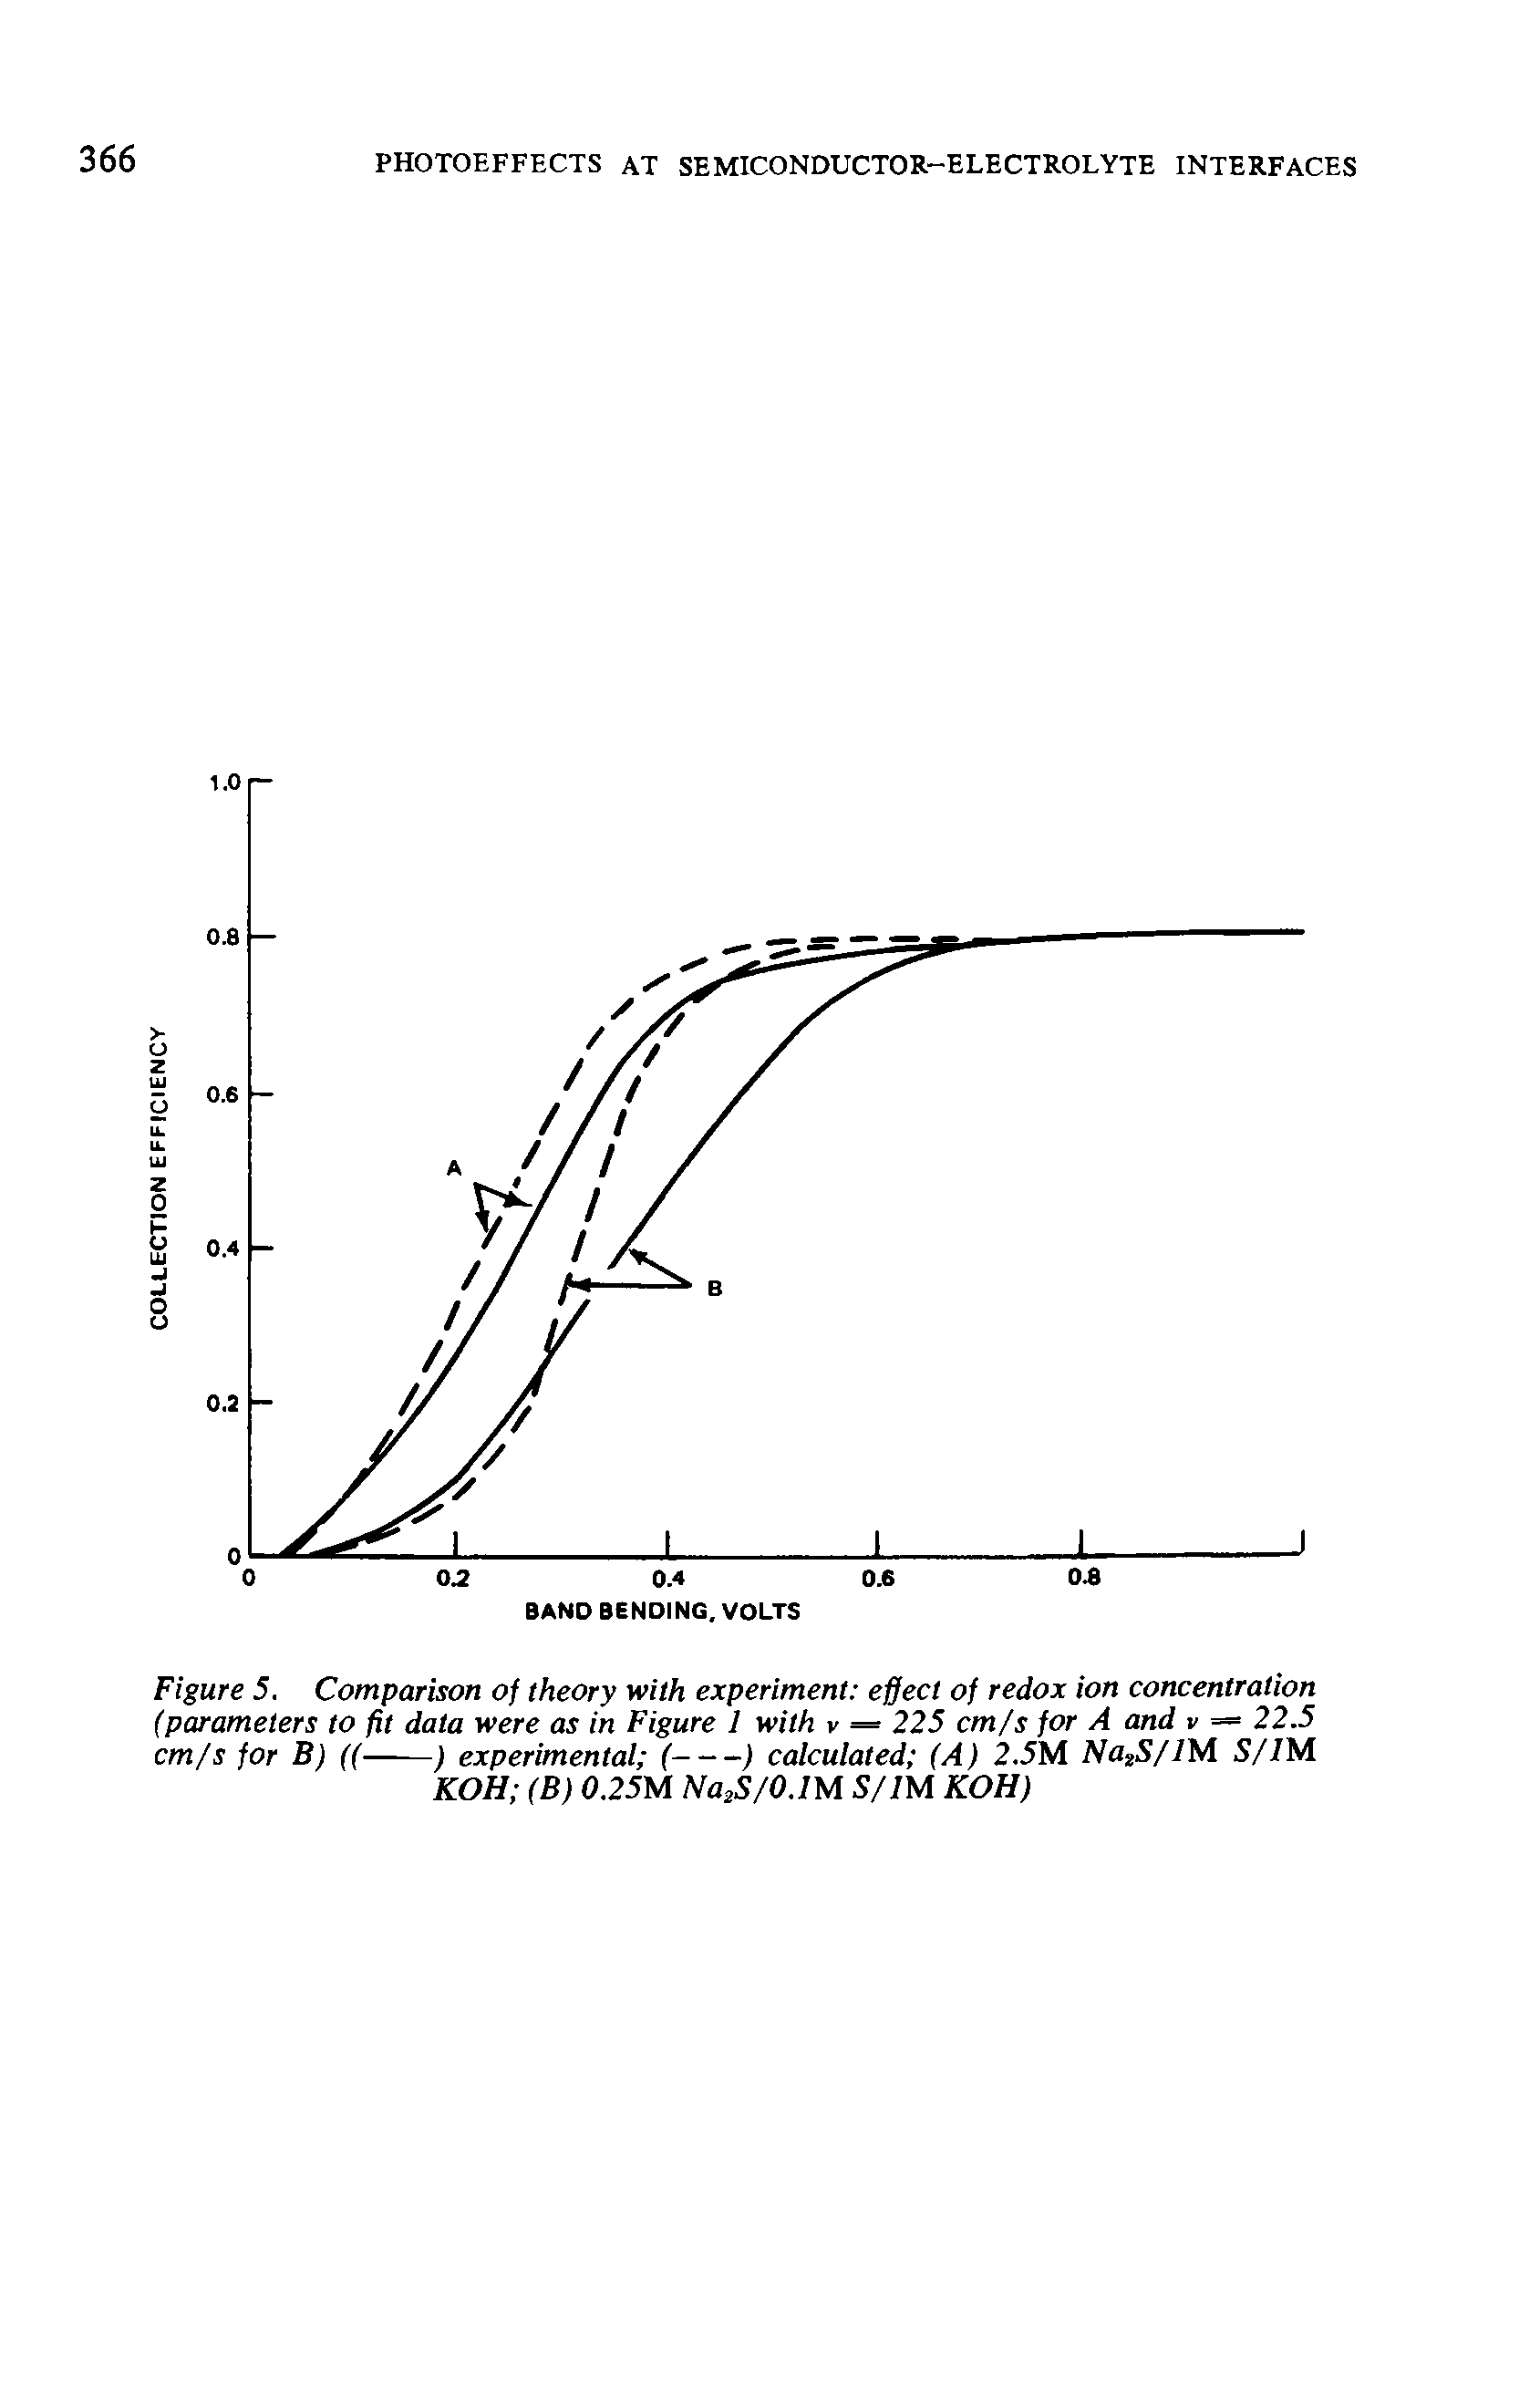 Figure 5. Comparison of theory with experiment effect of redox ion concentration (parameters to fit data were as in Figure 1 with v = 225 cm/s for A and v = 22.5...